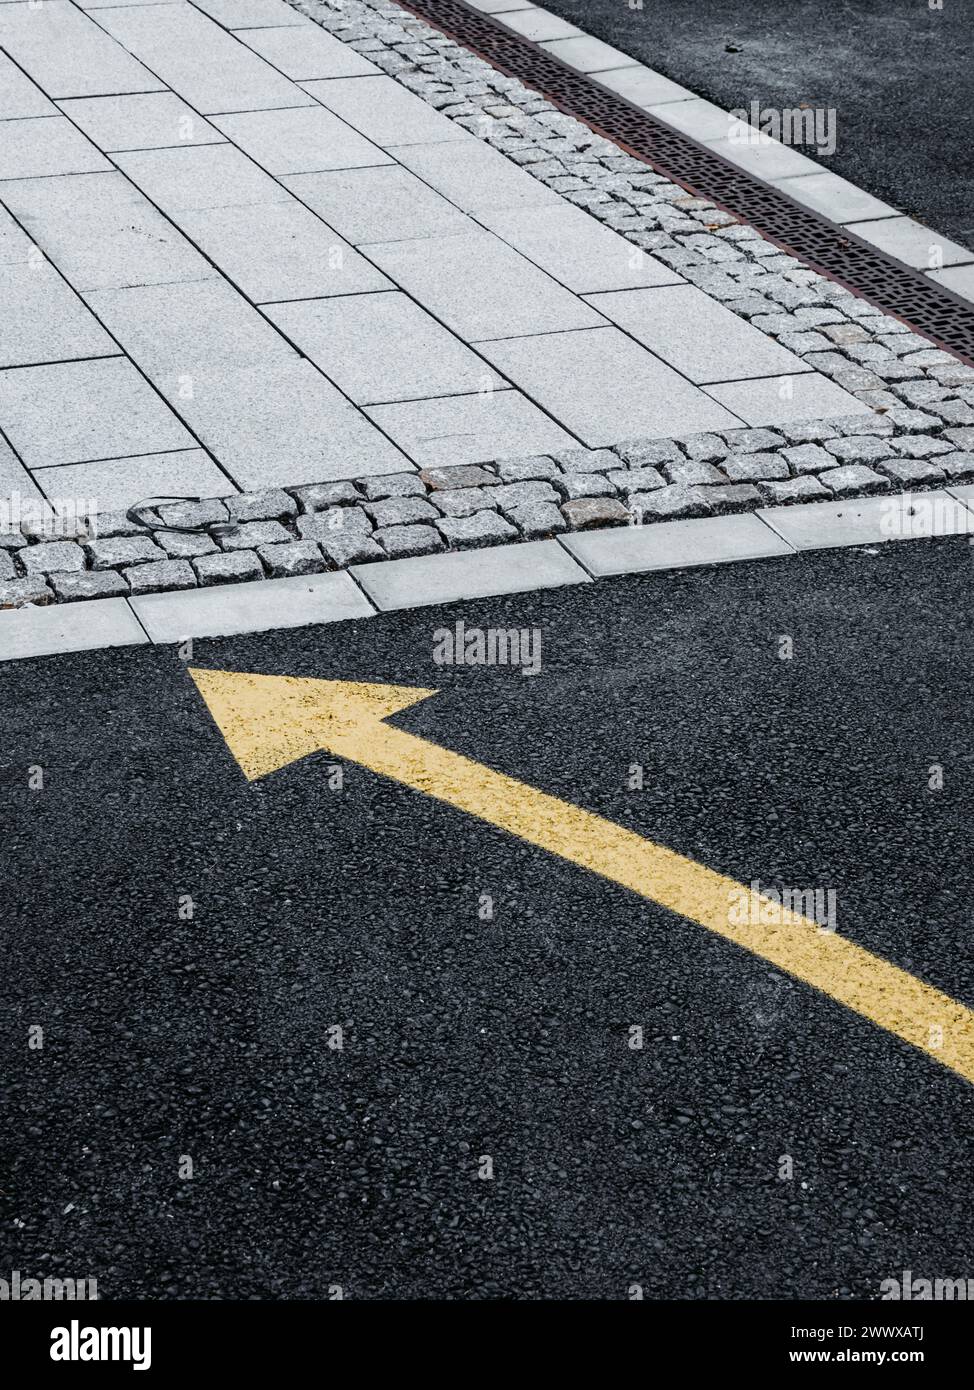 A freshly painted yellow arrow points right on the dark asphalt of a Swedish street, indicating the direction of traffic flow or guiding pedestrians. Stock Photo